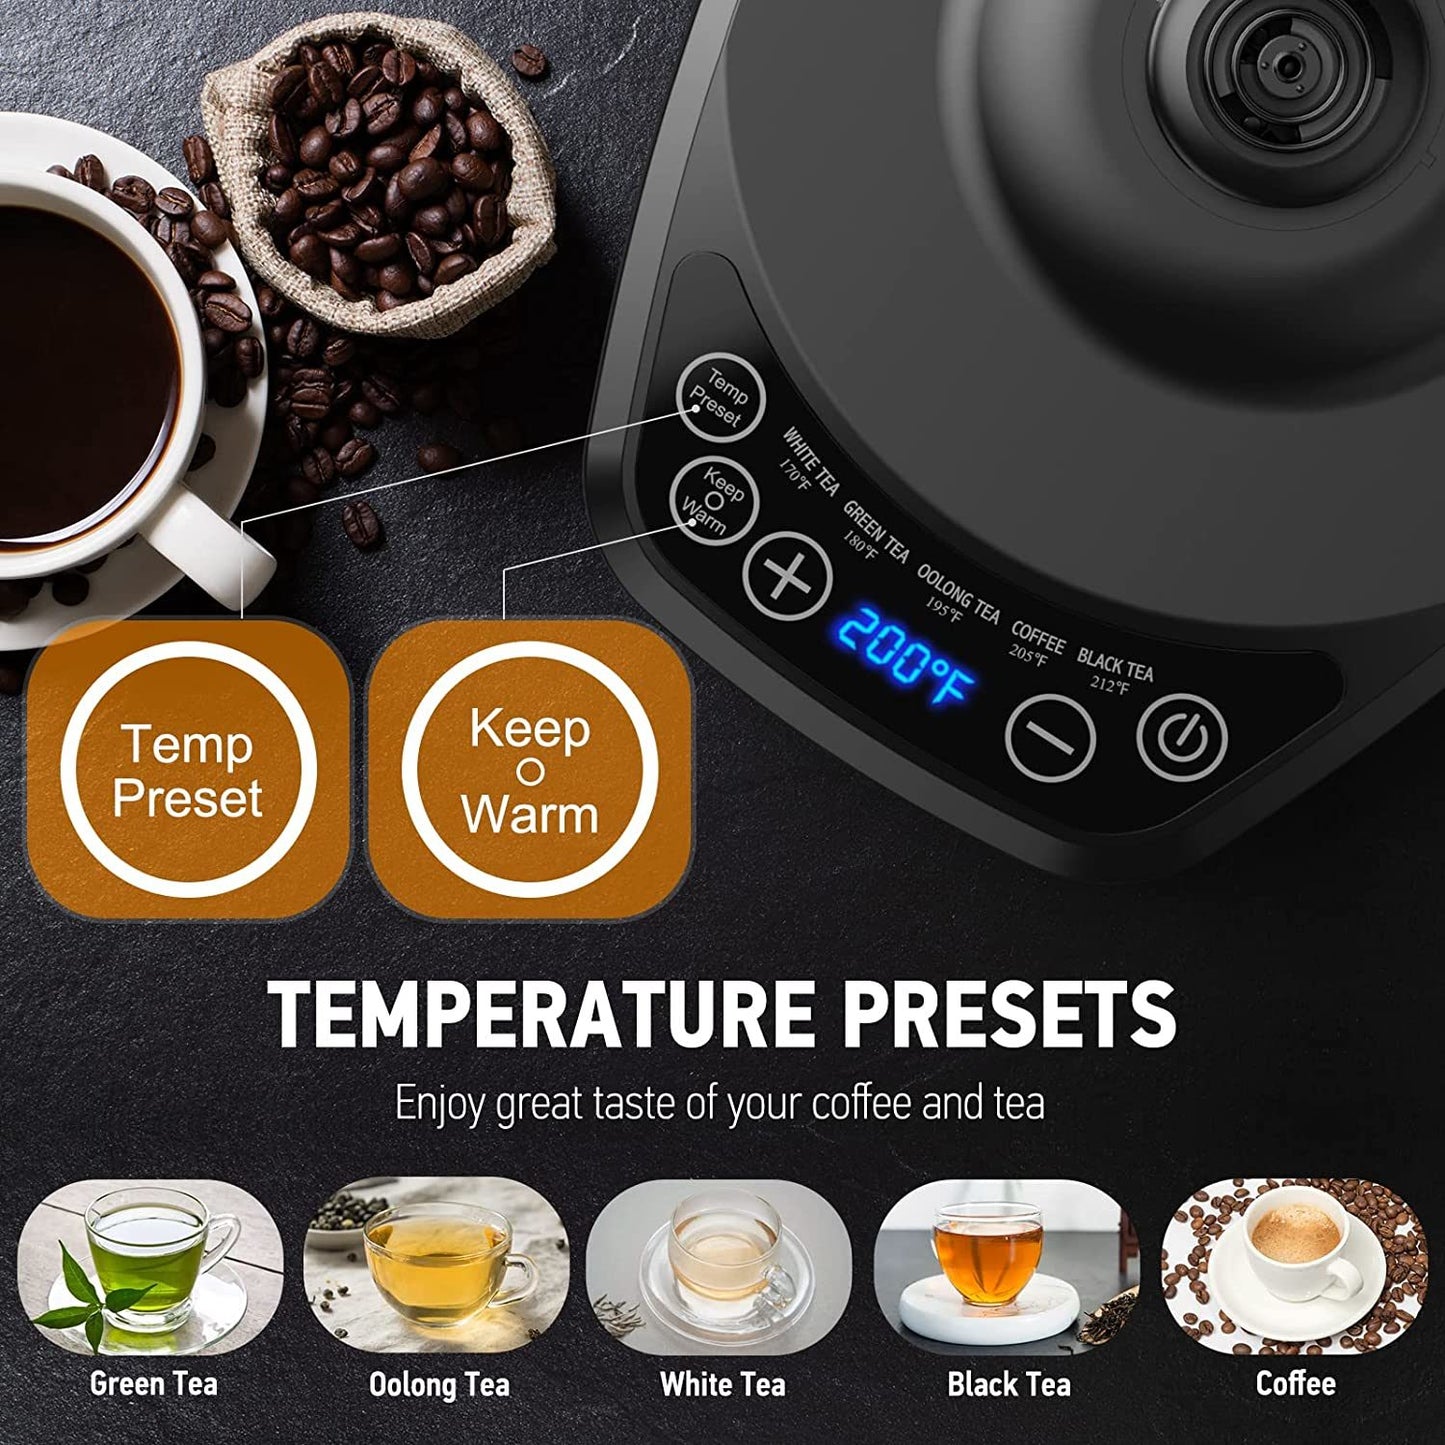 Electric Gooseneck Kettle Temperature Control & 5 Variable Presets;  Pour-Over Tea Kettle for Coffee Brewing;  Stainless Steel Inner;  1200W Rapid Heating;  Temp Holding;  0.8L;  Matte Black